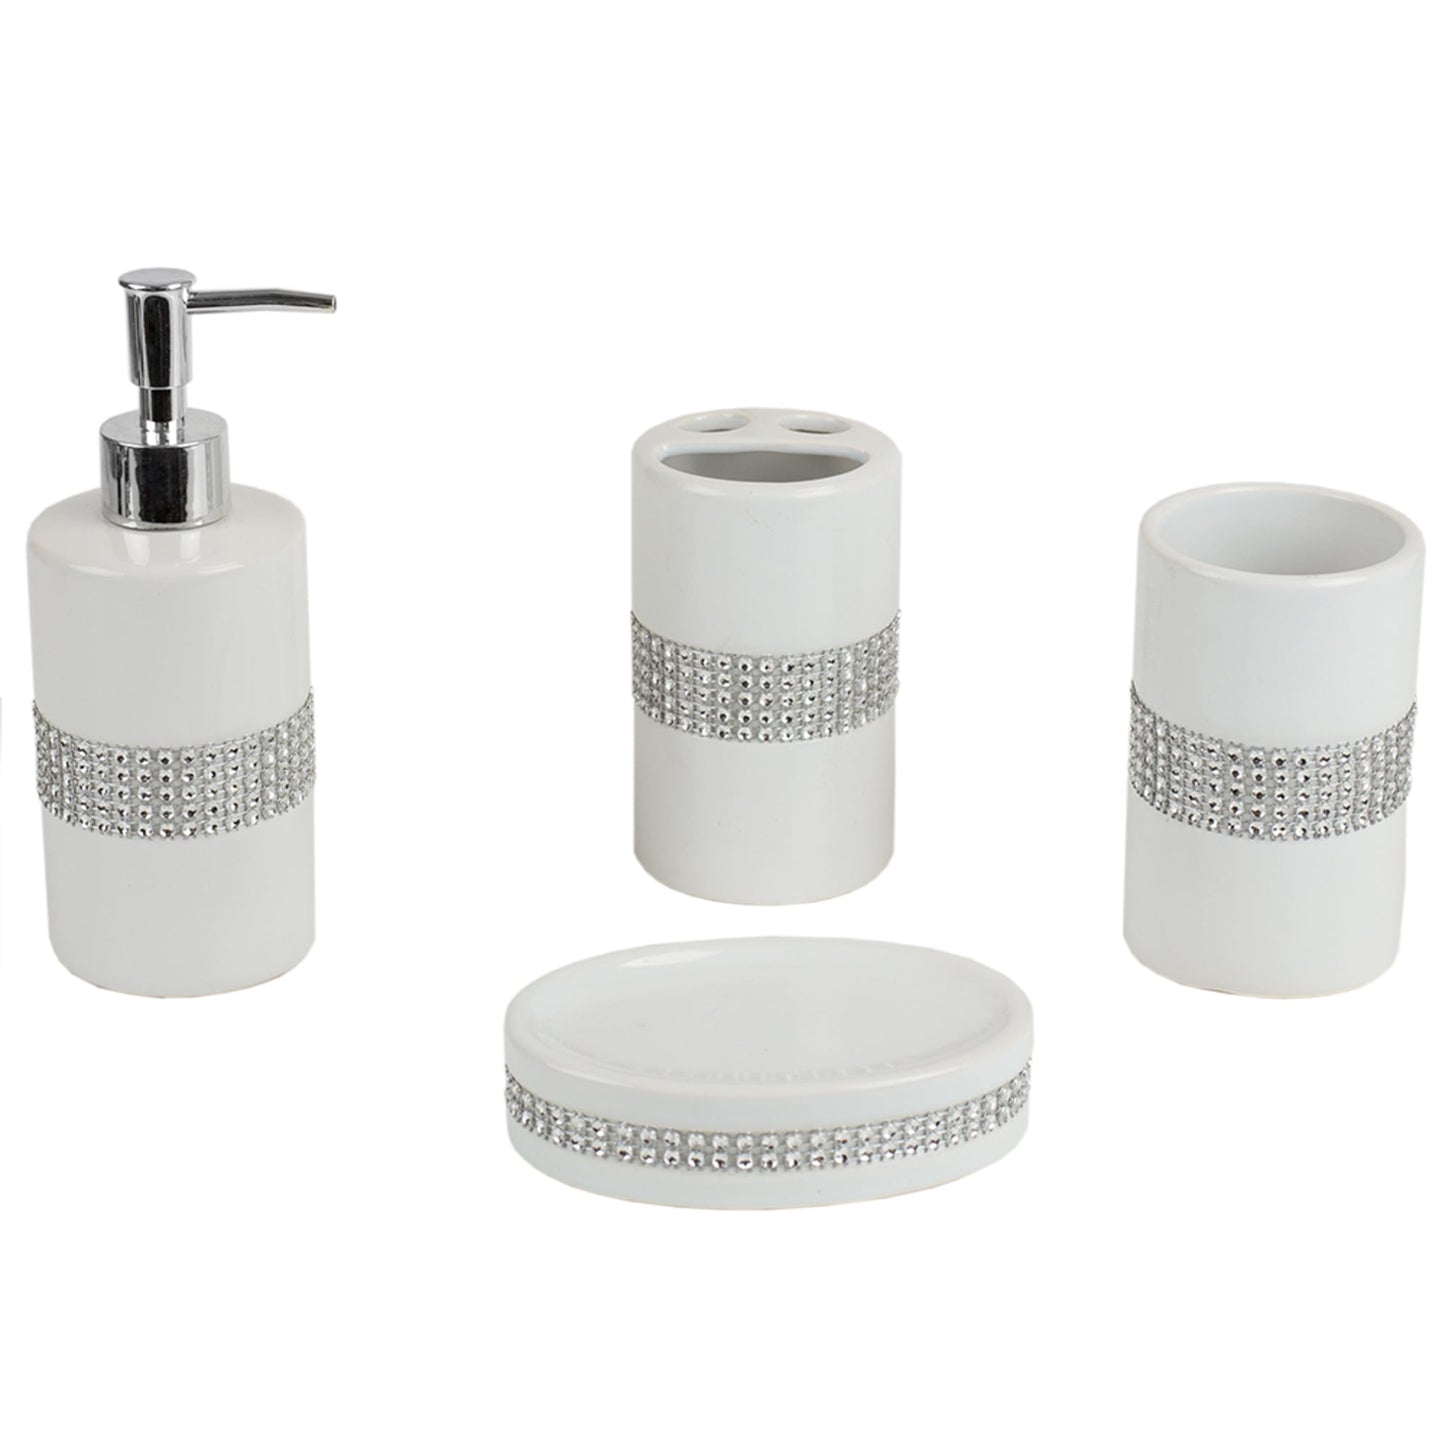 4 Piece Ceramic Luxury Bath Accessory Set with Stunning Sequin Accents, White